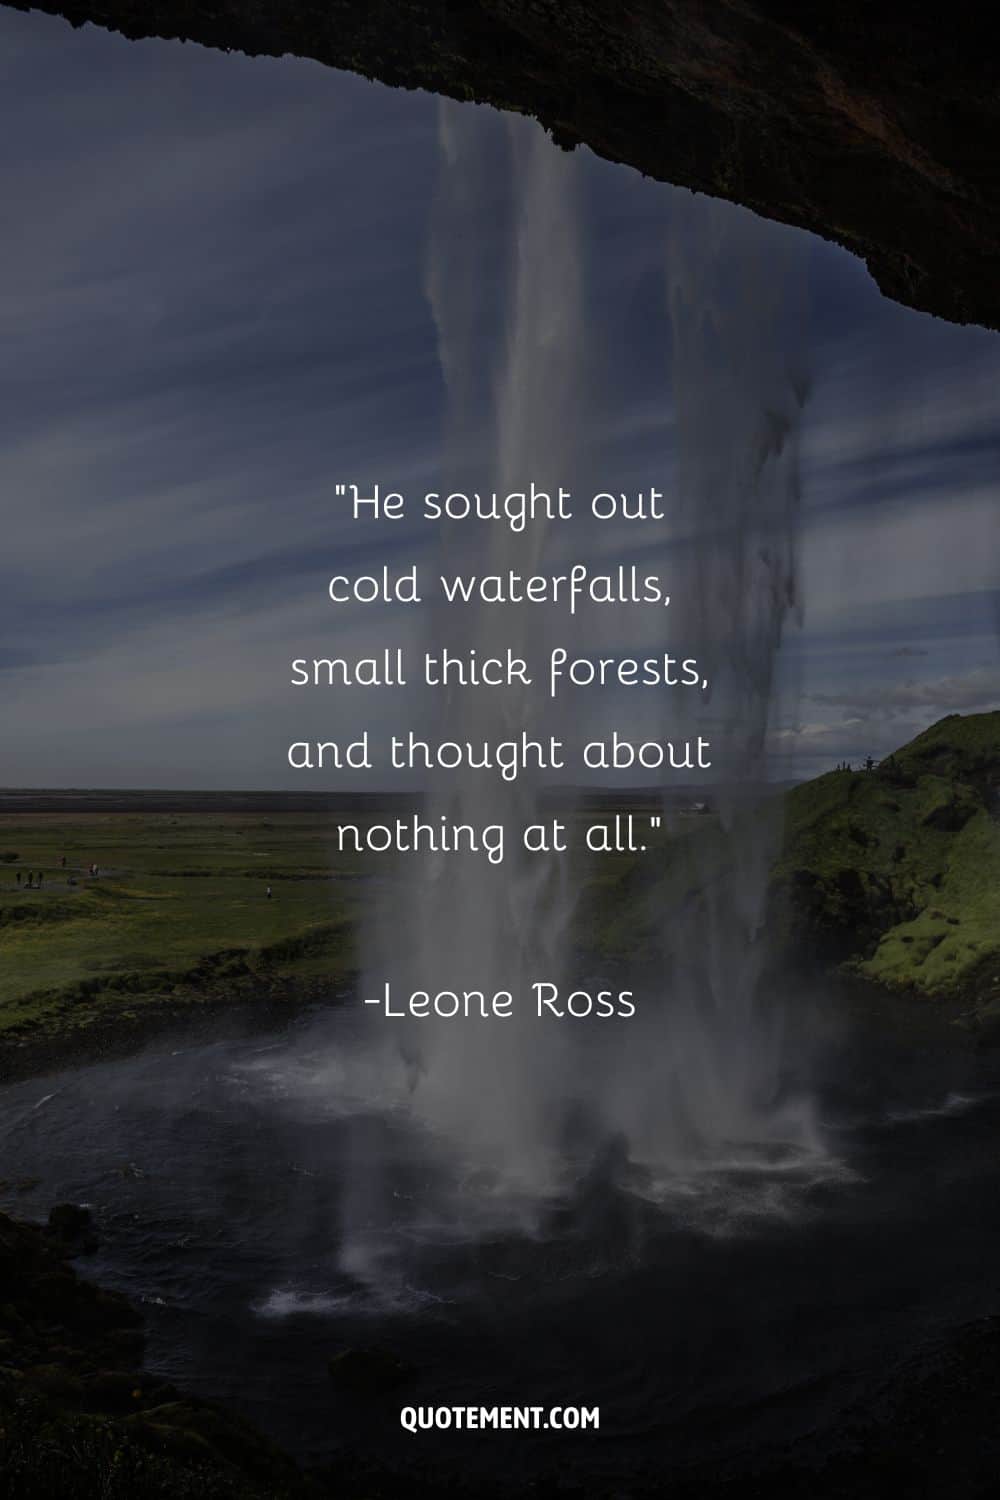 Inspirational quote by Leone Ross on seeking waterfalls and forests, and a waterfall in the background
